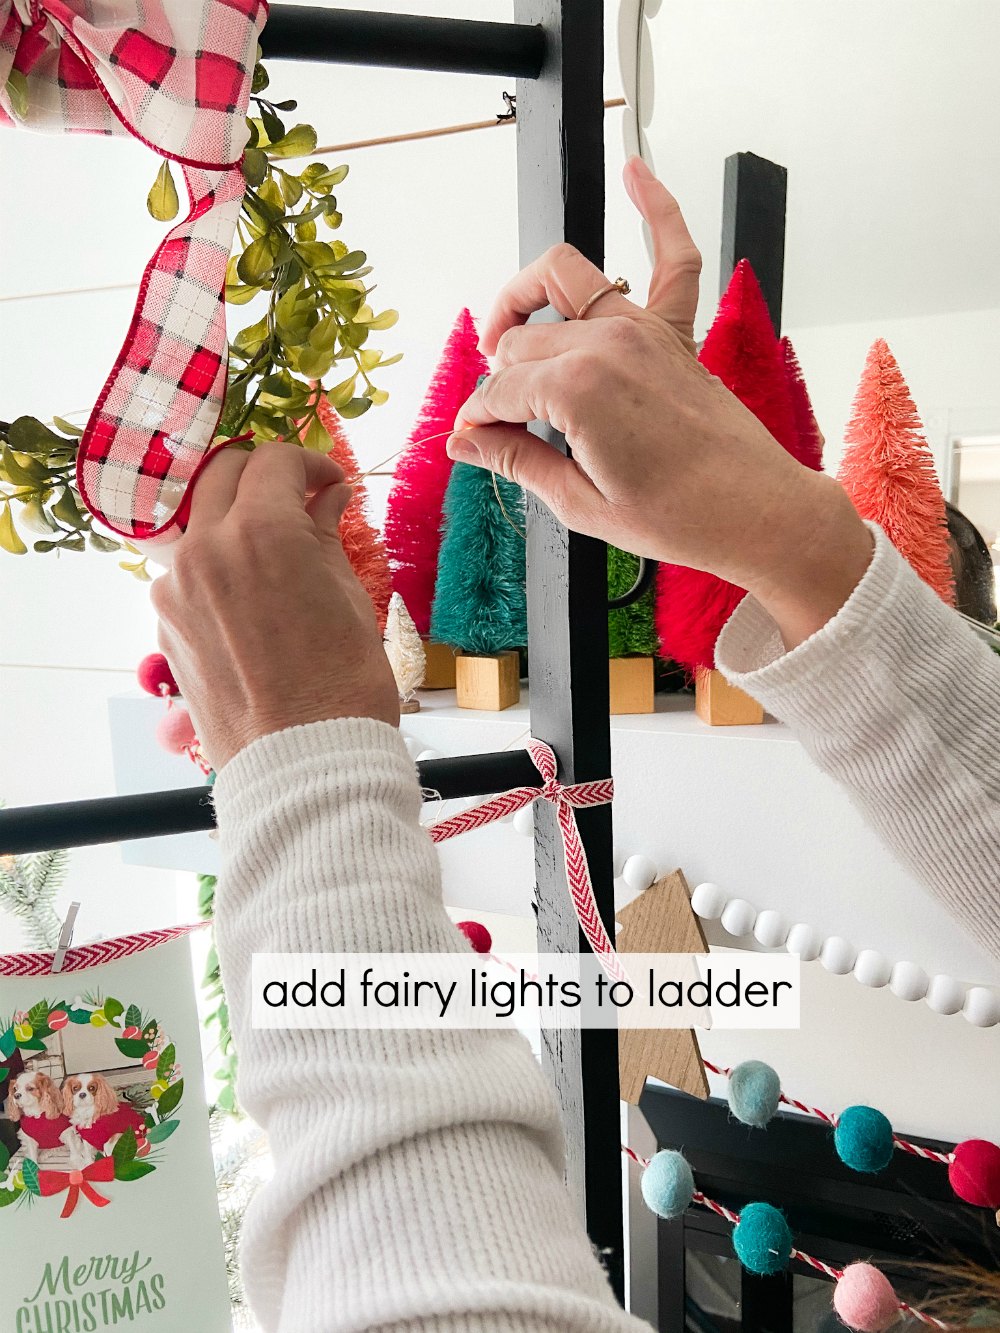 DIY Holiday Card Display Ladder. Build this simple ladder to display cards and stockings this holiday season! 